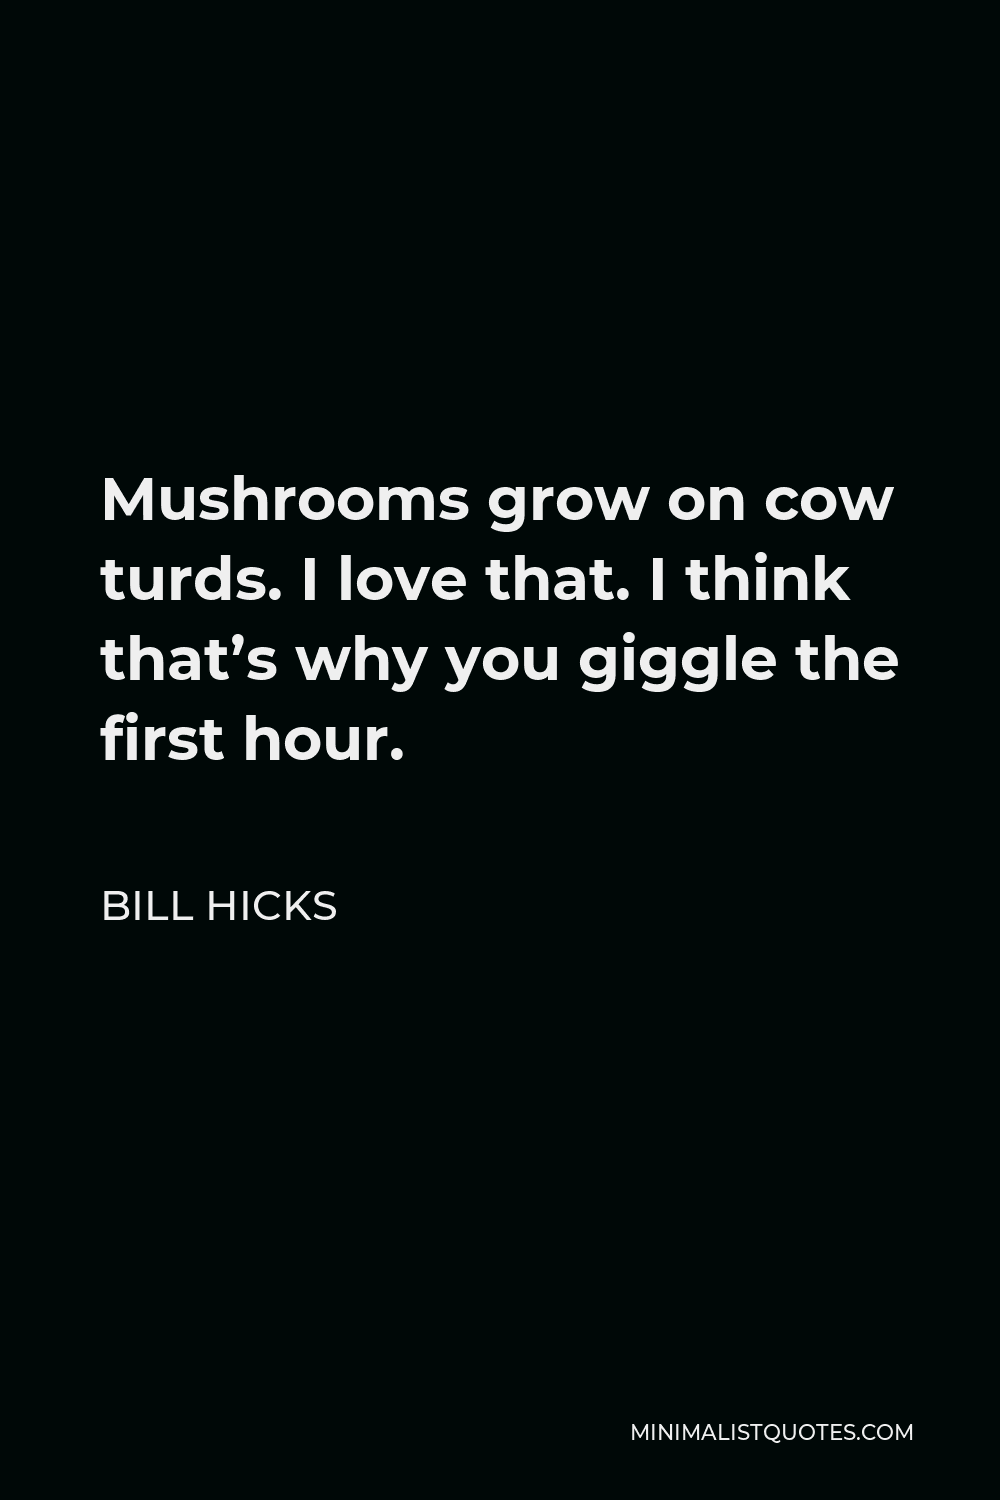 Bill Hicks Quote - Mushrooms grow on cow turds. I love that. I think that’s why you giggle the first hour.